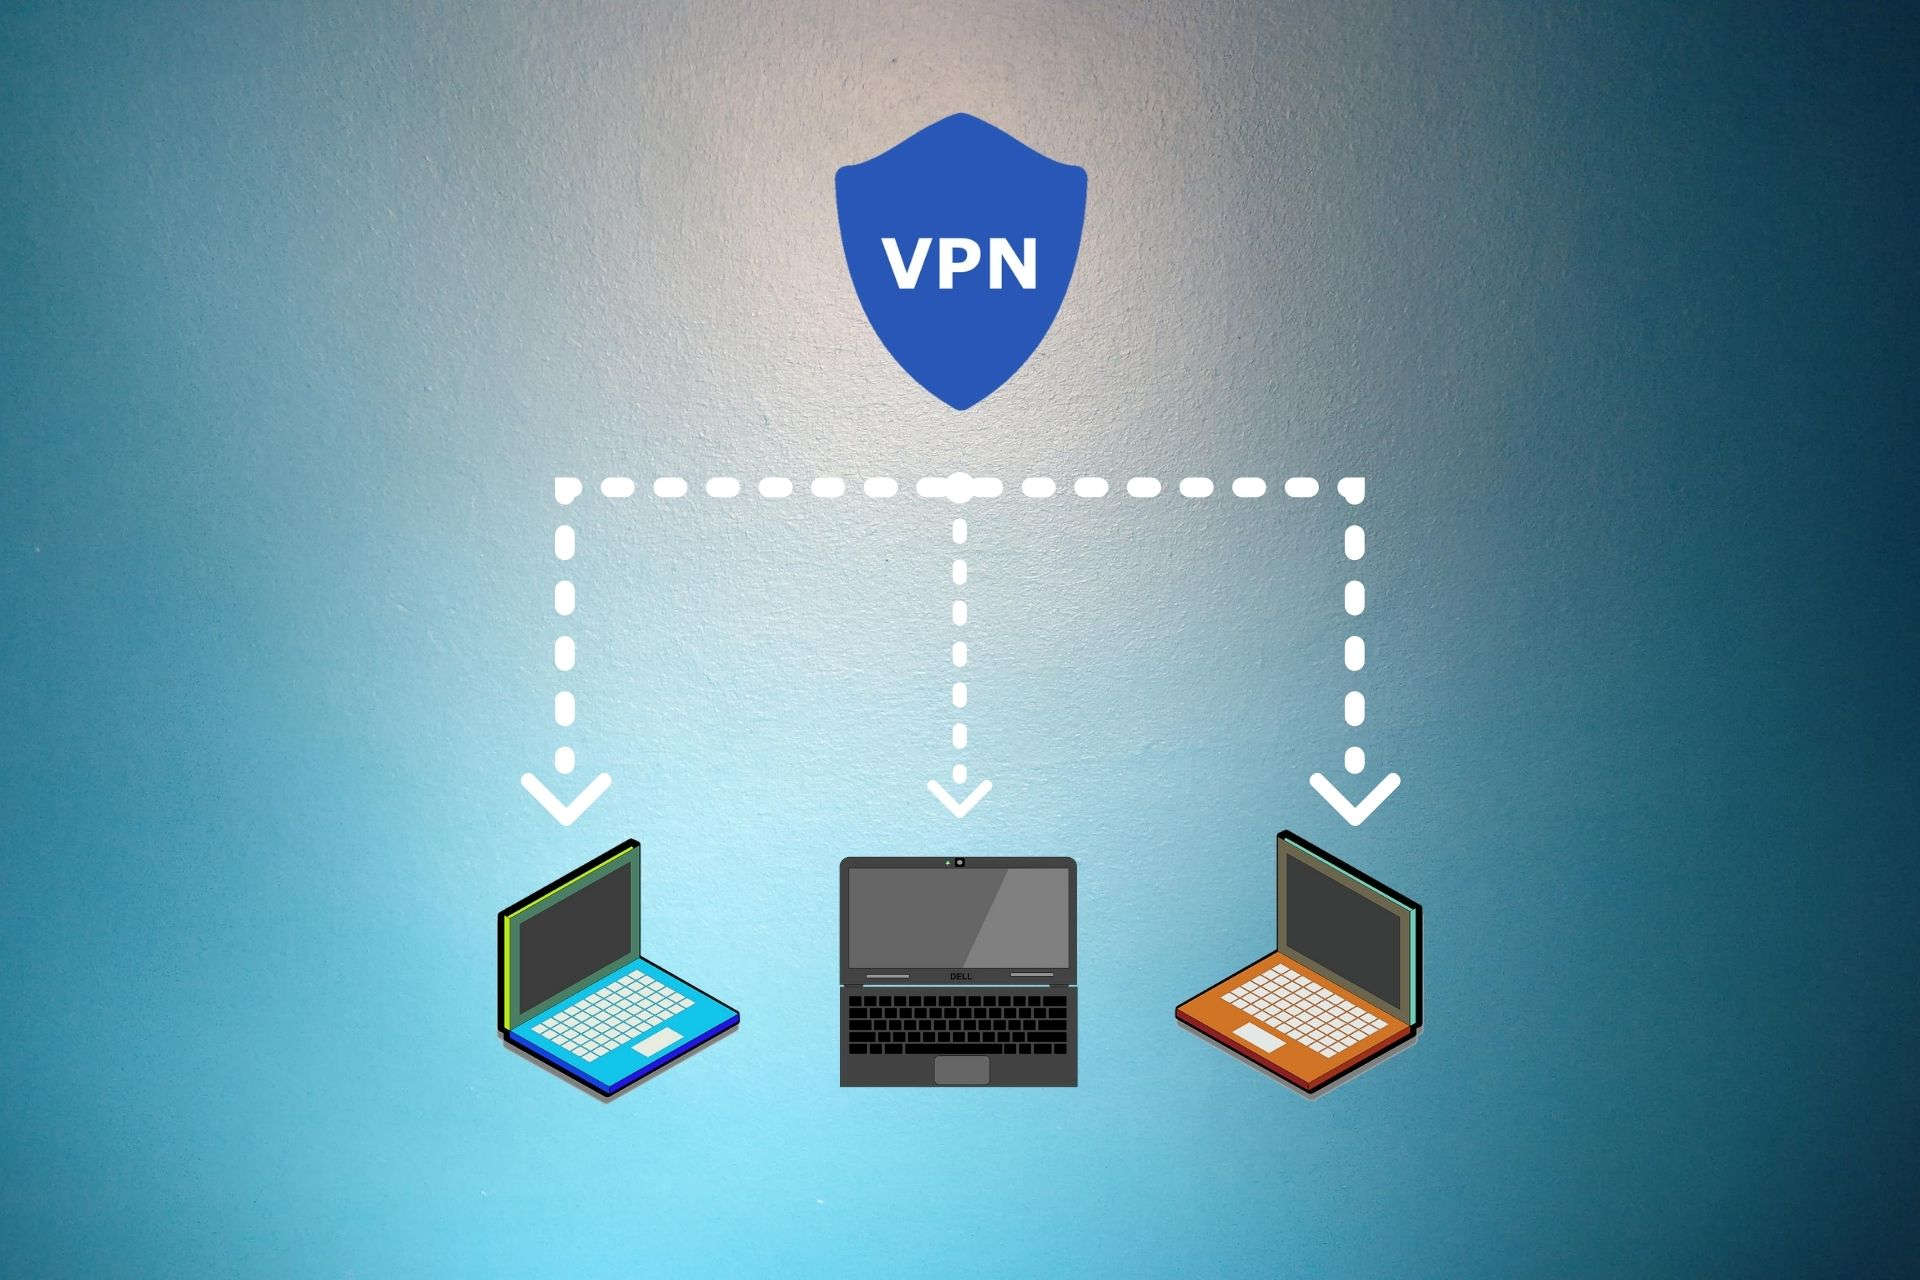 How to add VPN connection in Windows 10 using Group Policies